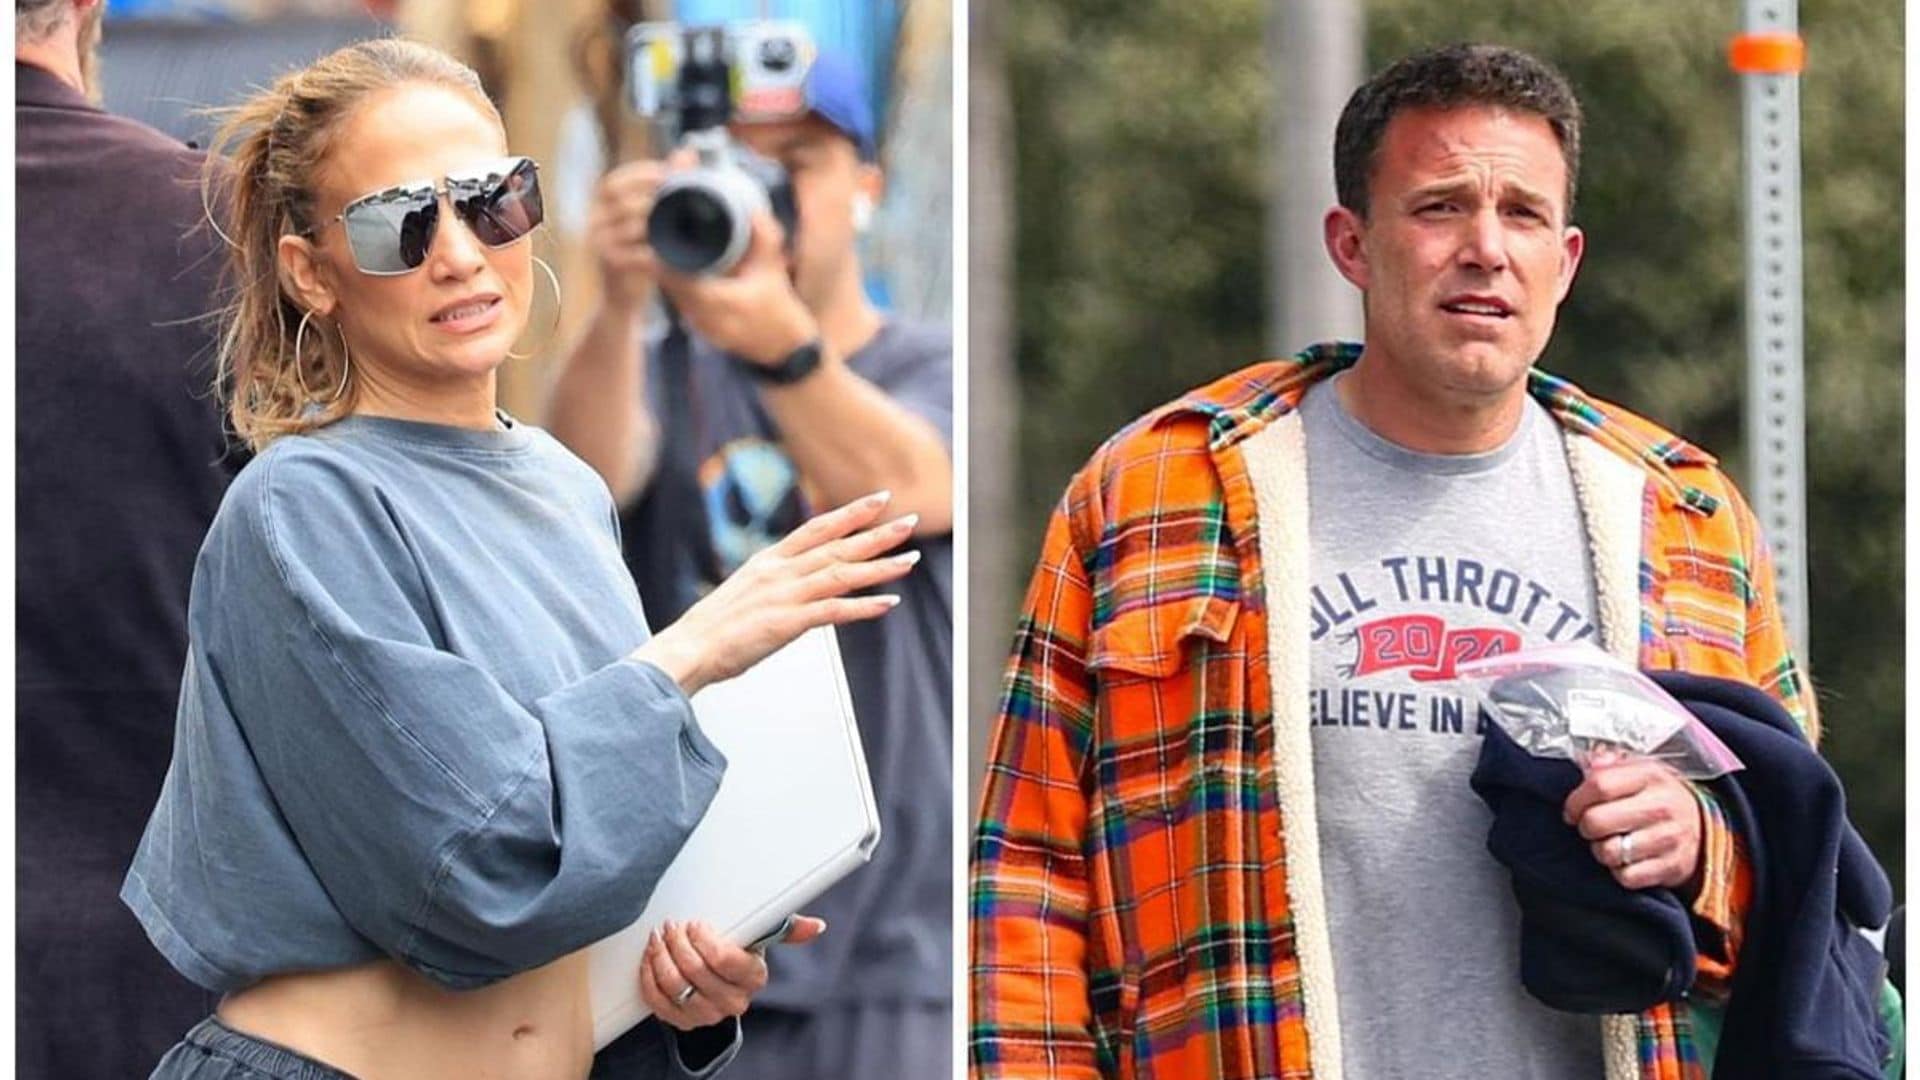 Jennifer Lopez and Ben Affleck step out wearing their wedding bands amid divorce speculation